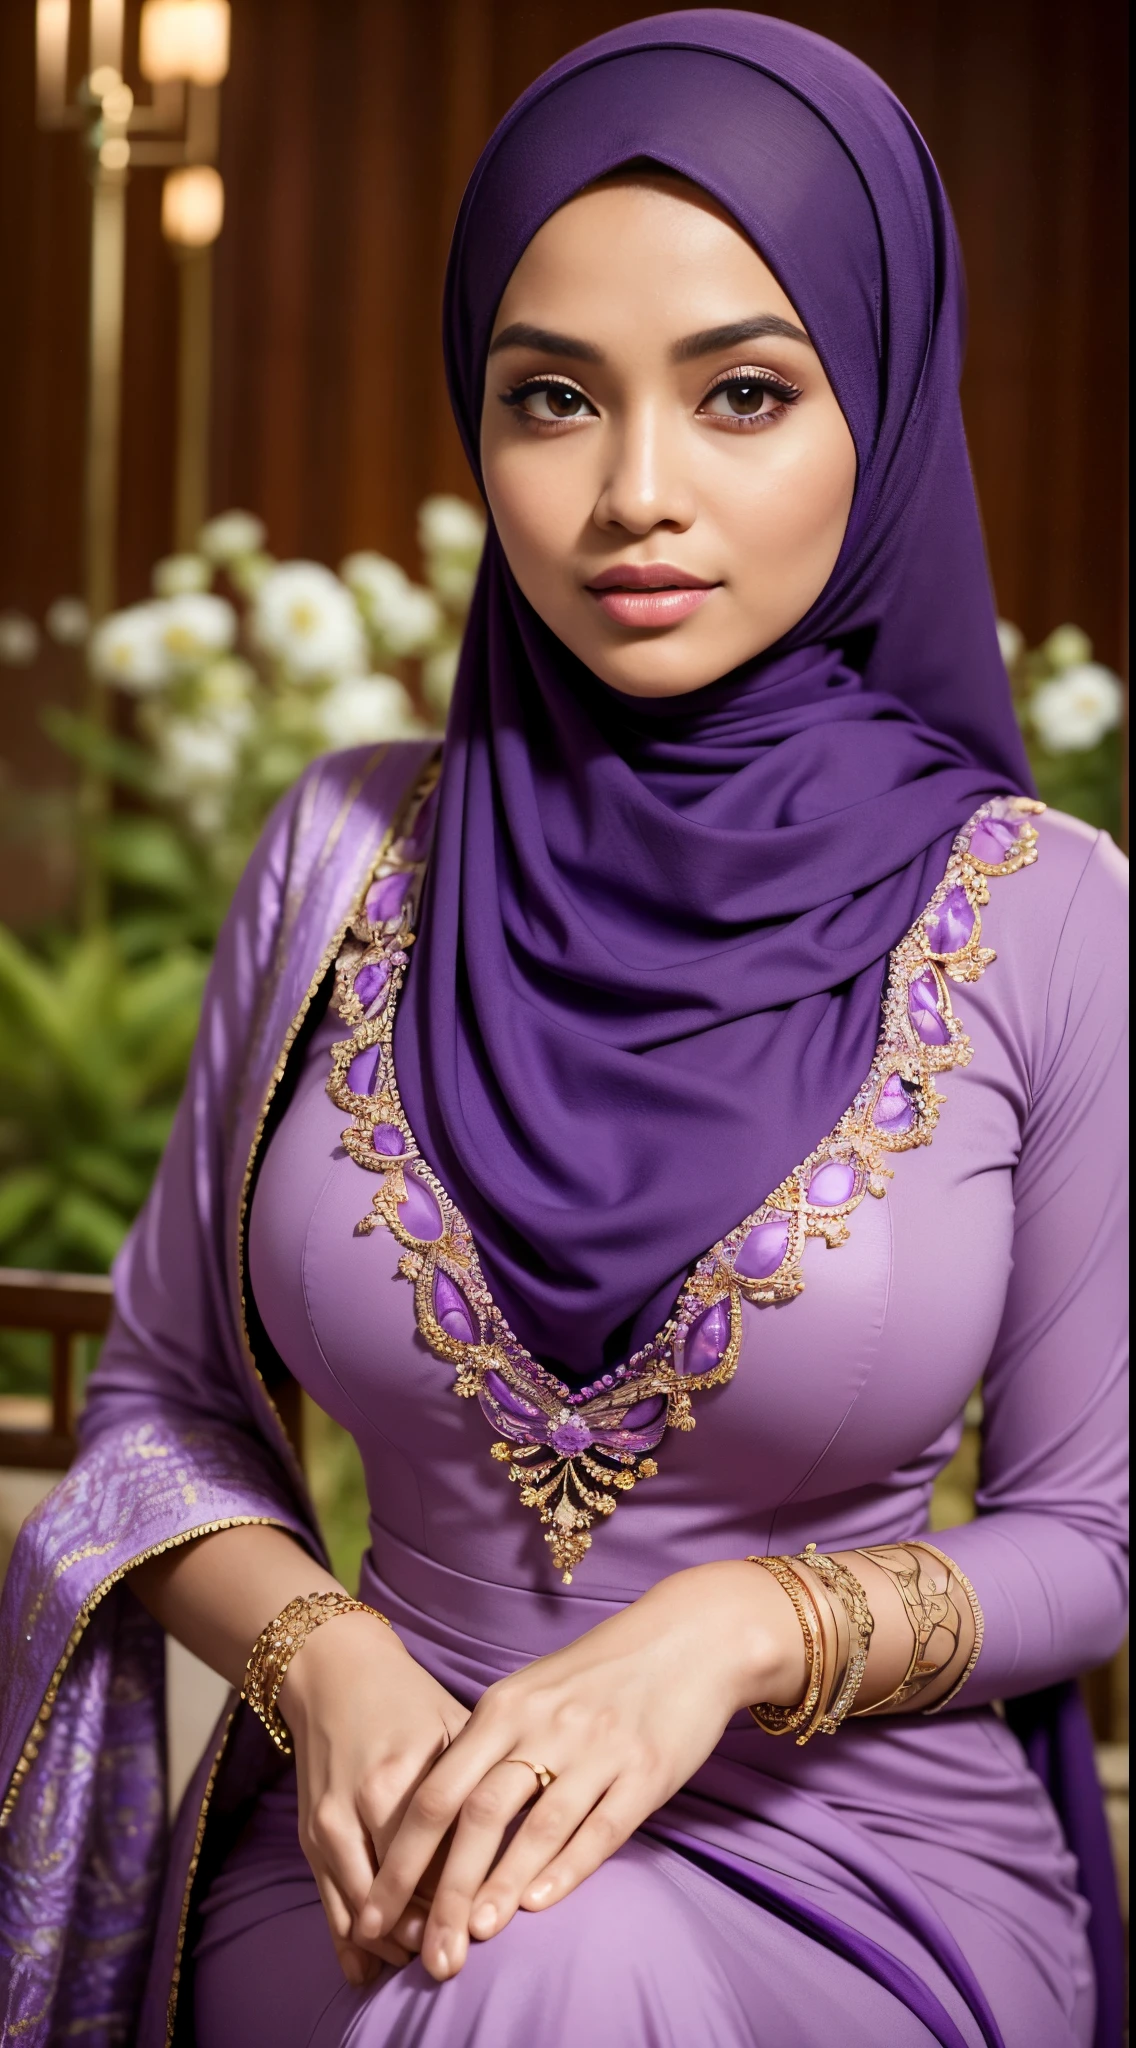 RAW, Best quality, high resolution, masterpiece: 1.3), beautiful Malay woman in hijab,Masterpiece, perfect slim fit body, Huge breast,big gorgeous eyes, Soft smile,thick thighs, a close up of a woman in a purple dress and a purple scarf, jacked purple, wearing purple attire, wearing beautiful clothes, beautiful design, hijab, in crimson purple, very beautiful enga style, beautiful masterpiece, fine details. Purple, wearing gorgeous clothing, dominating purple color, crimson themed , (Delicate turtleneck) , necklace, shairband, afternoon walk, City garden, Excellent lighting, Bright colors, Clean lines